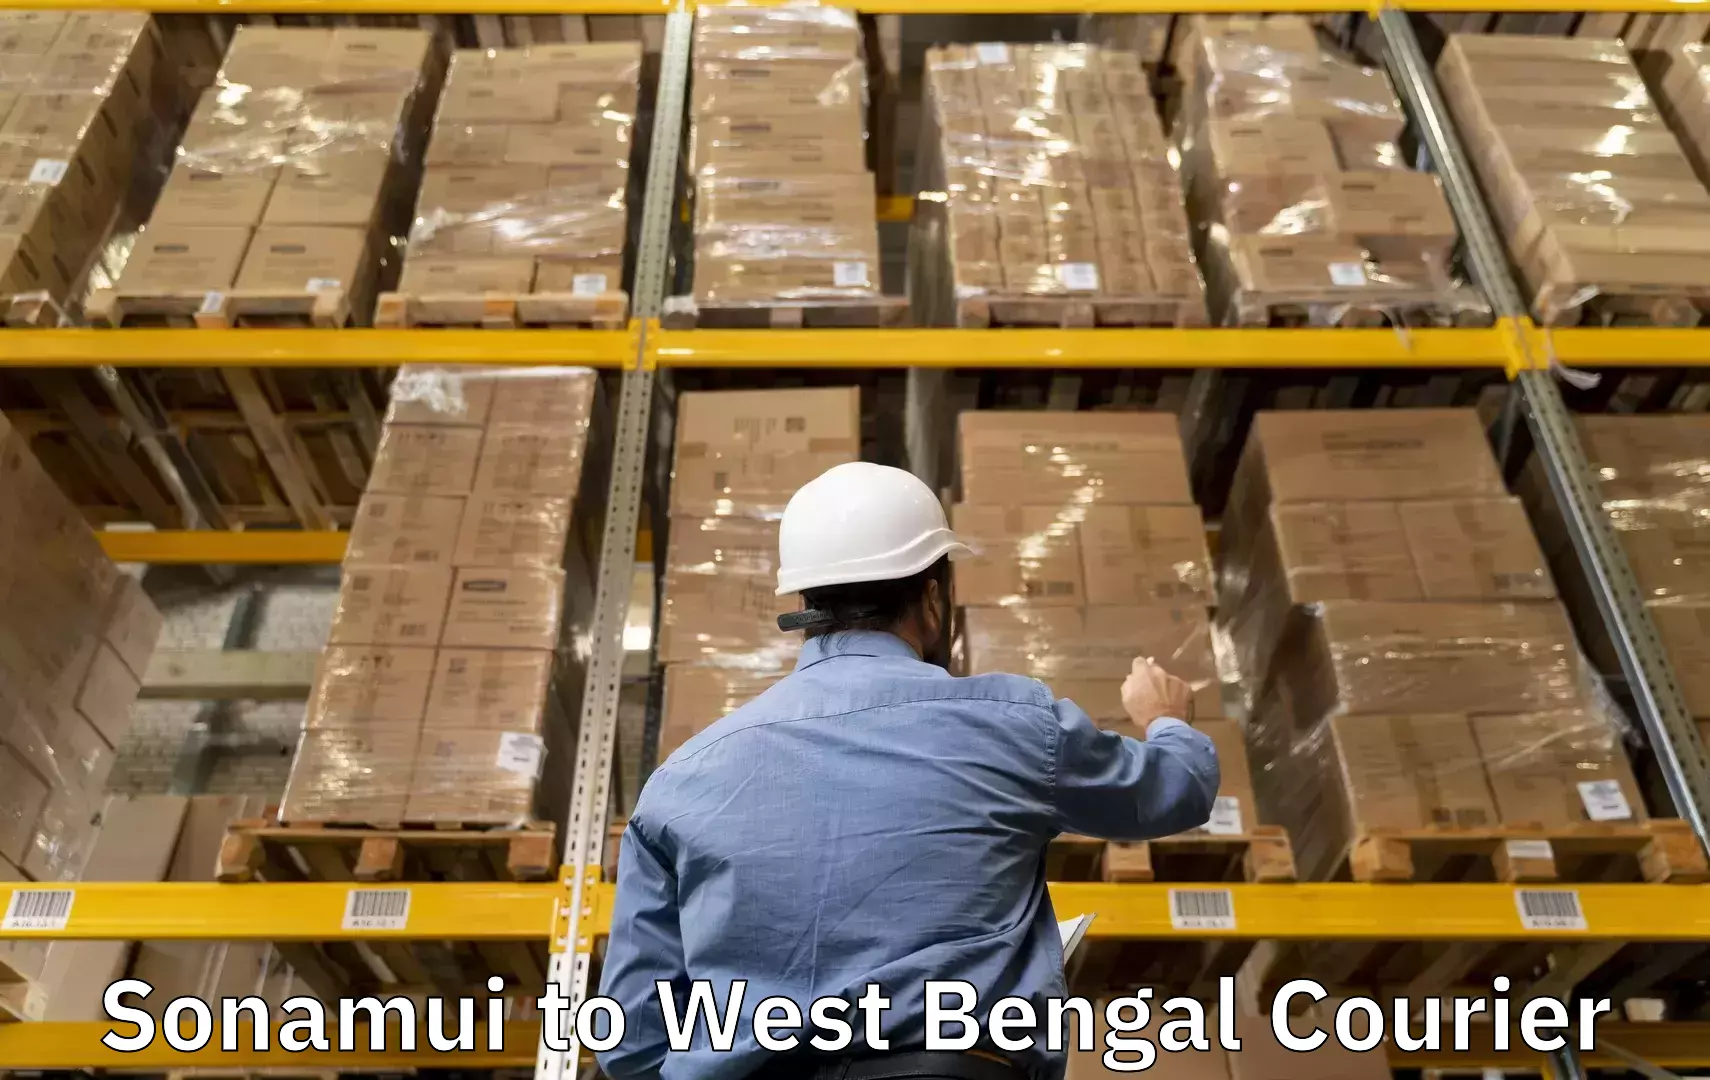 Baggage transport network Sonamui to West Bengal